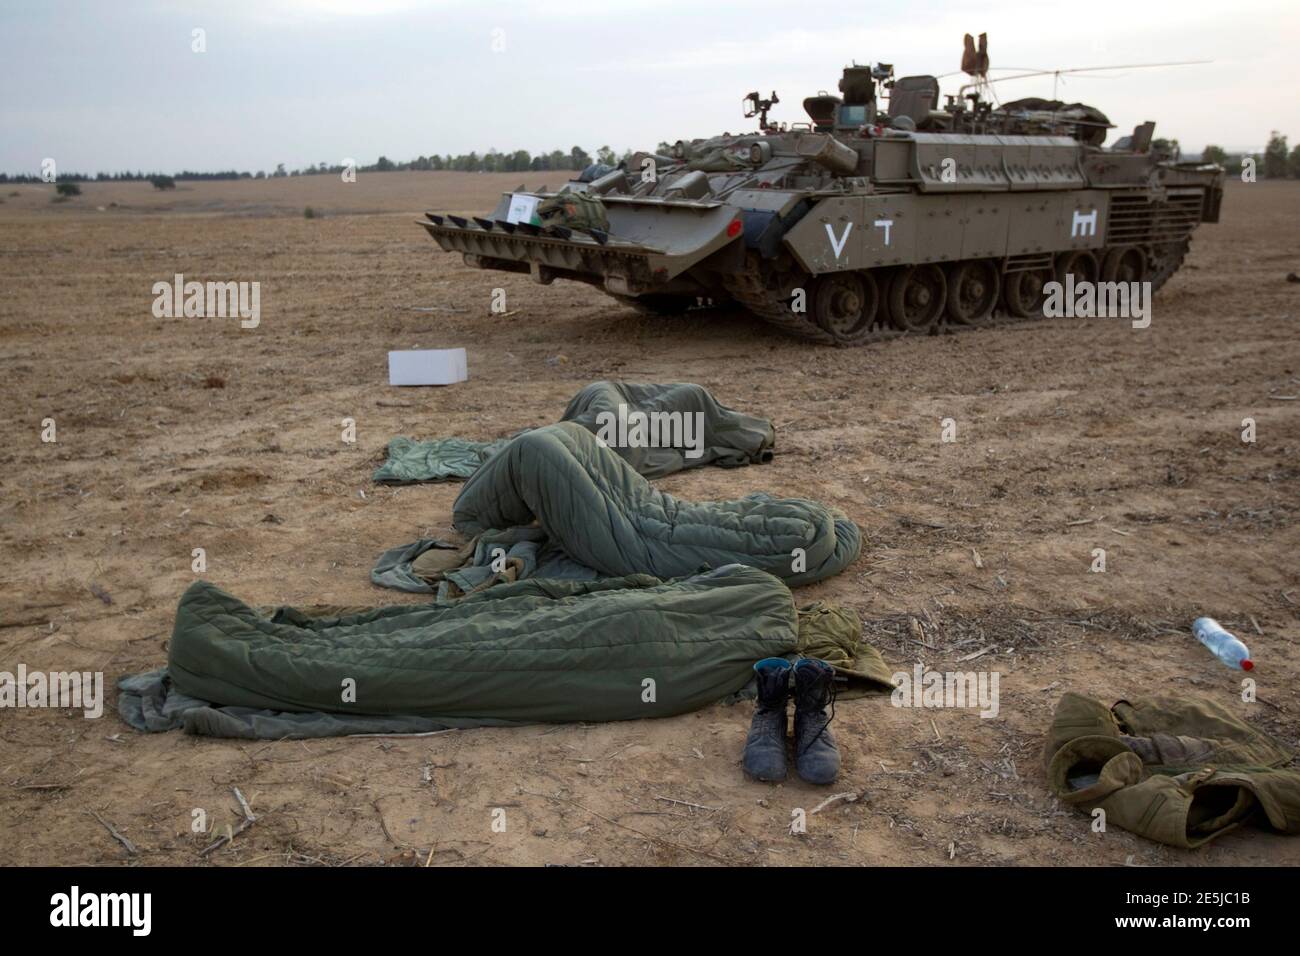 Israeli soldiers sleep in their sleeping bags next to a tank near the  border with the Gaza Strip November 17, 2012. Israeli aircraft pounded  Hamas government buildings in Gaza on Saturday, including